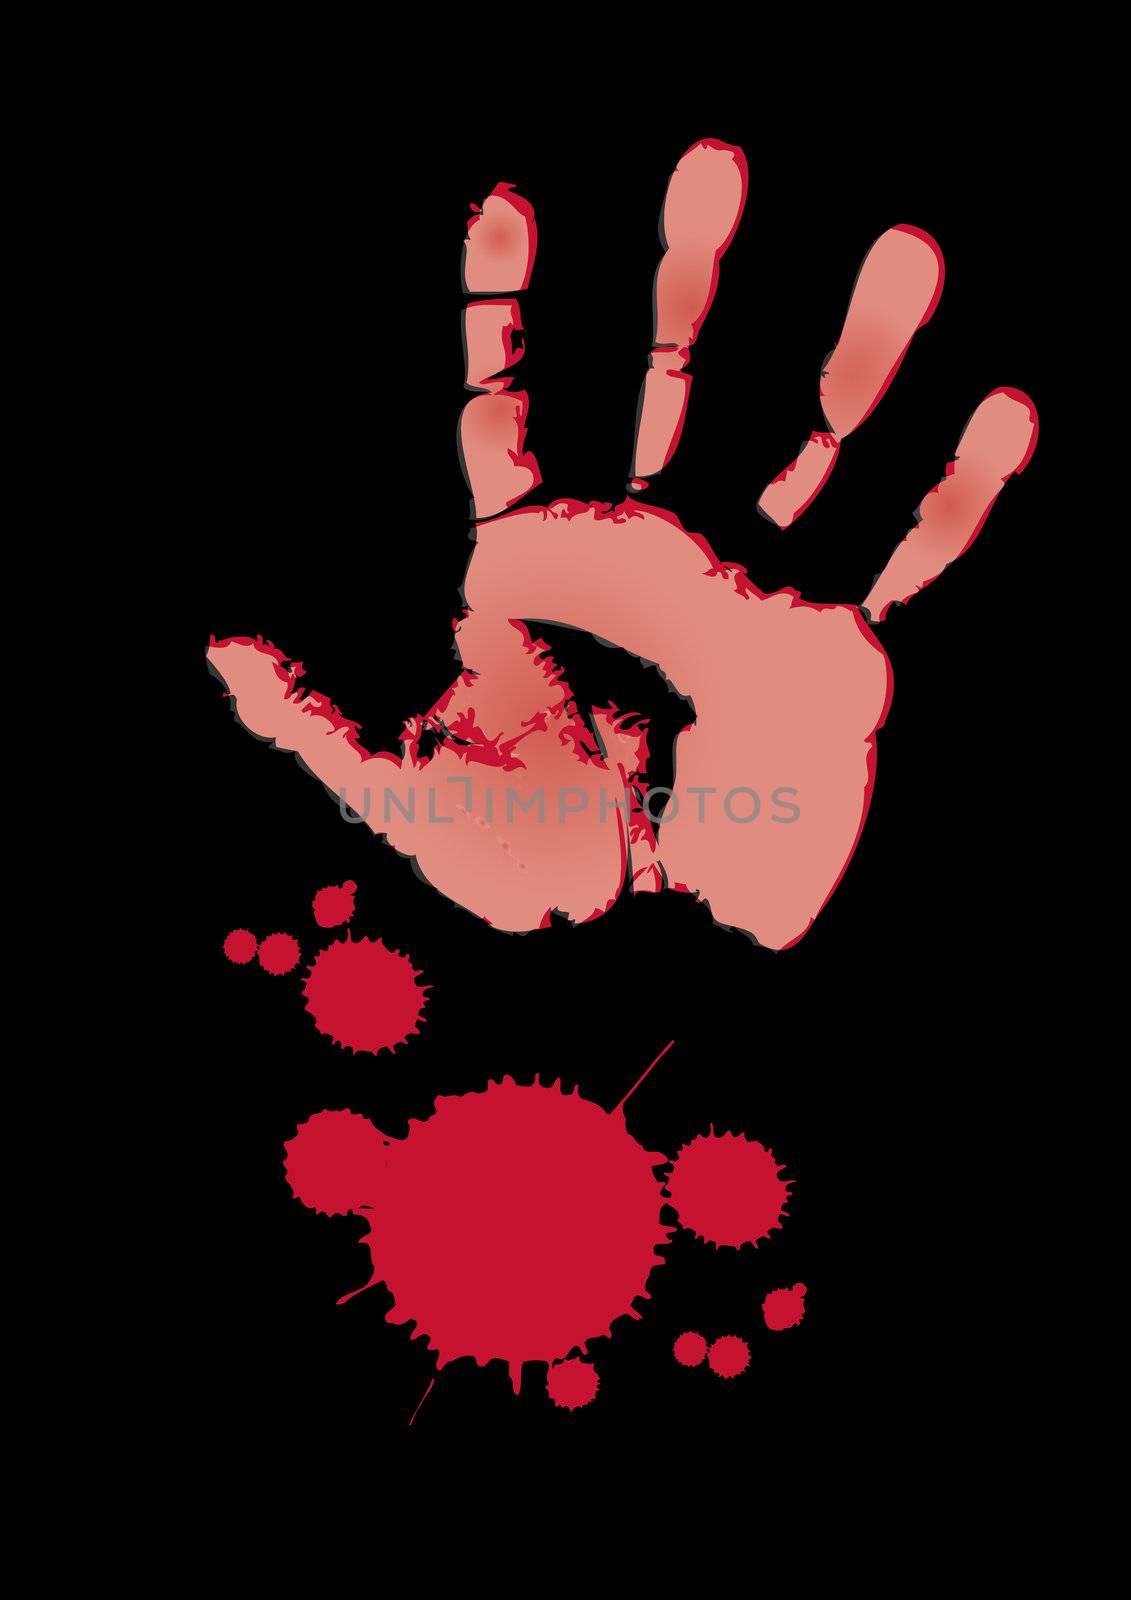 An illustration of a bloody hand print with a blood splatter set on a black background.